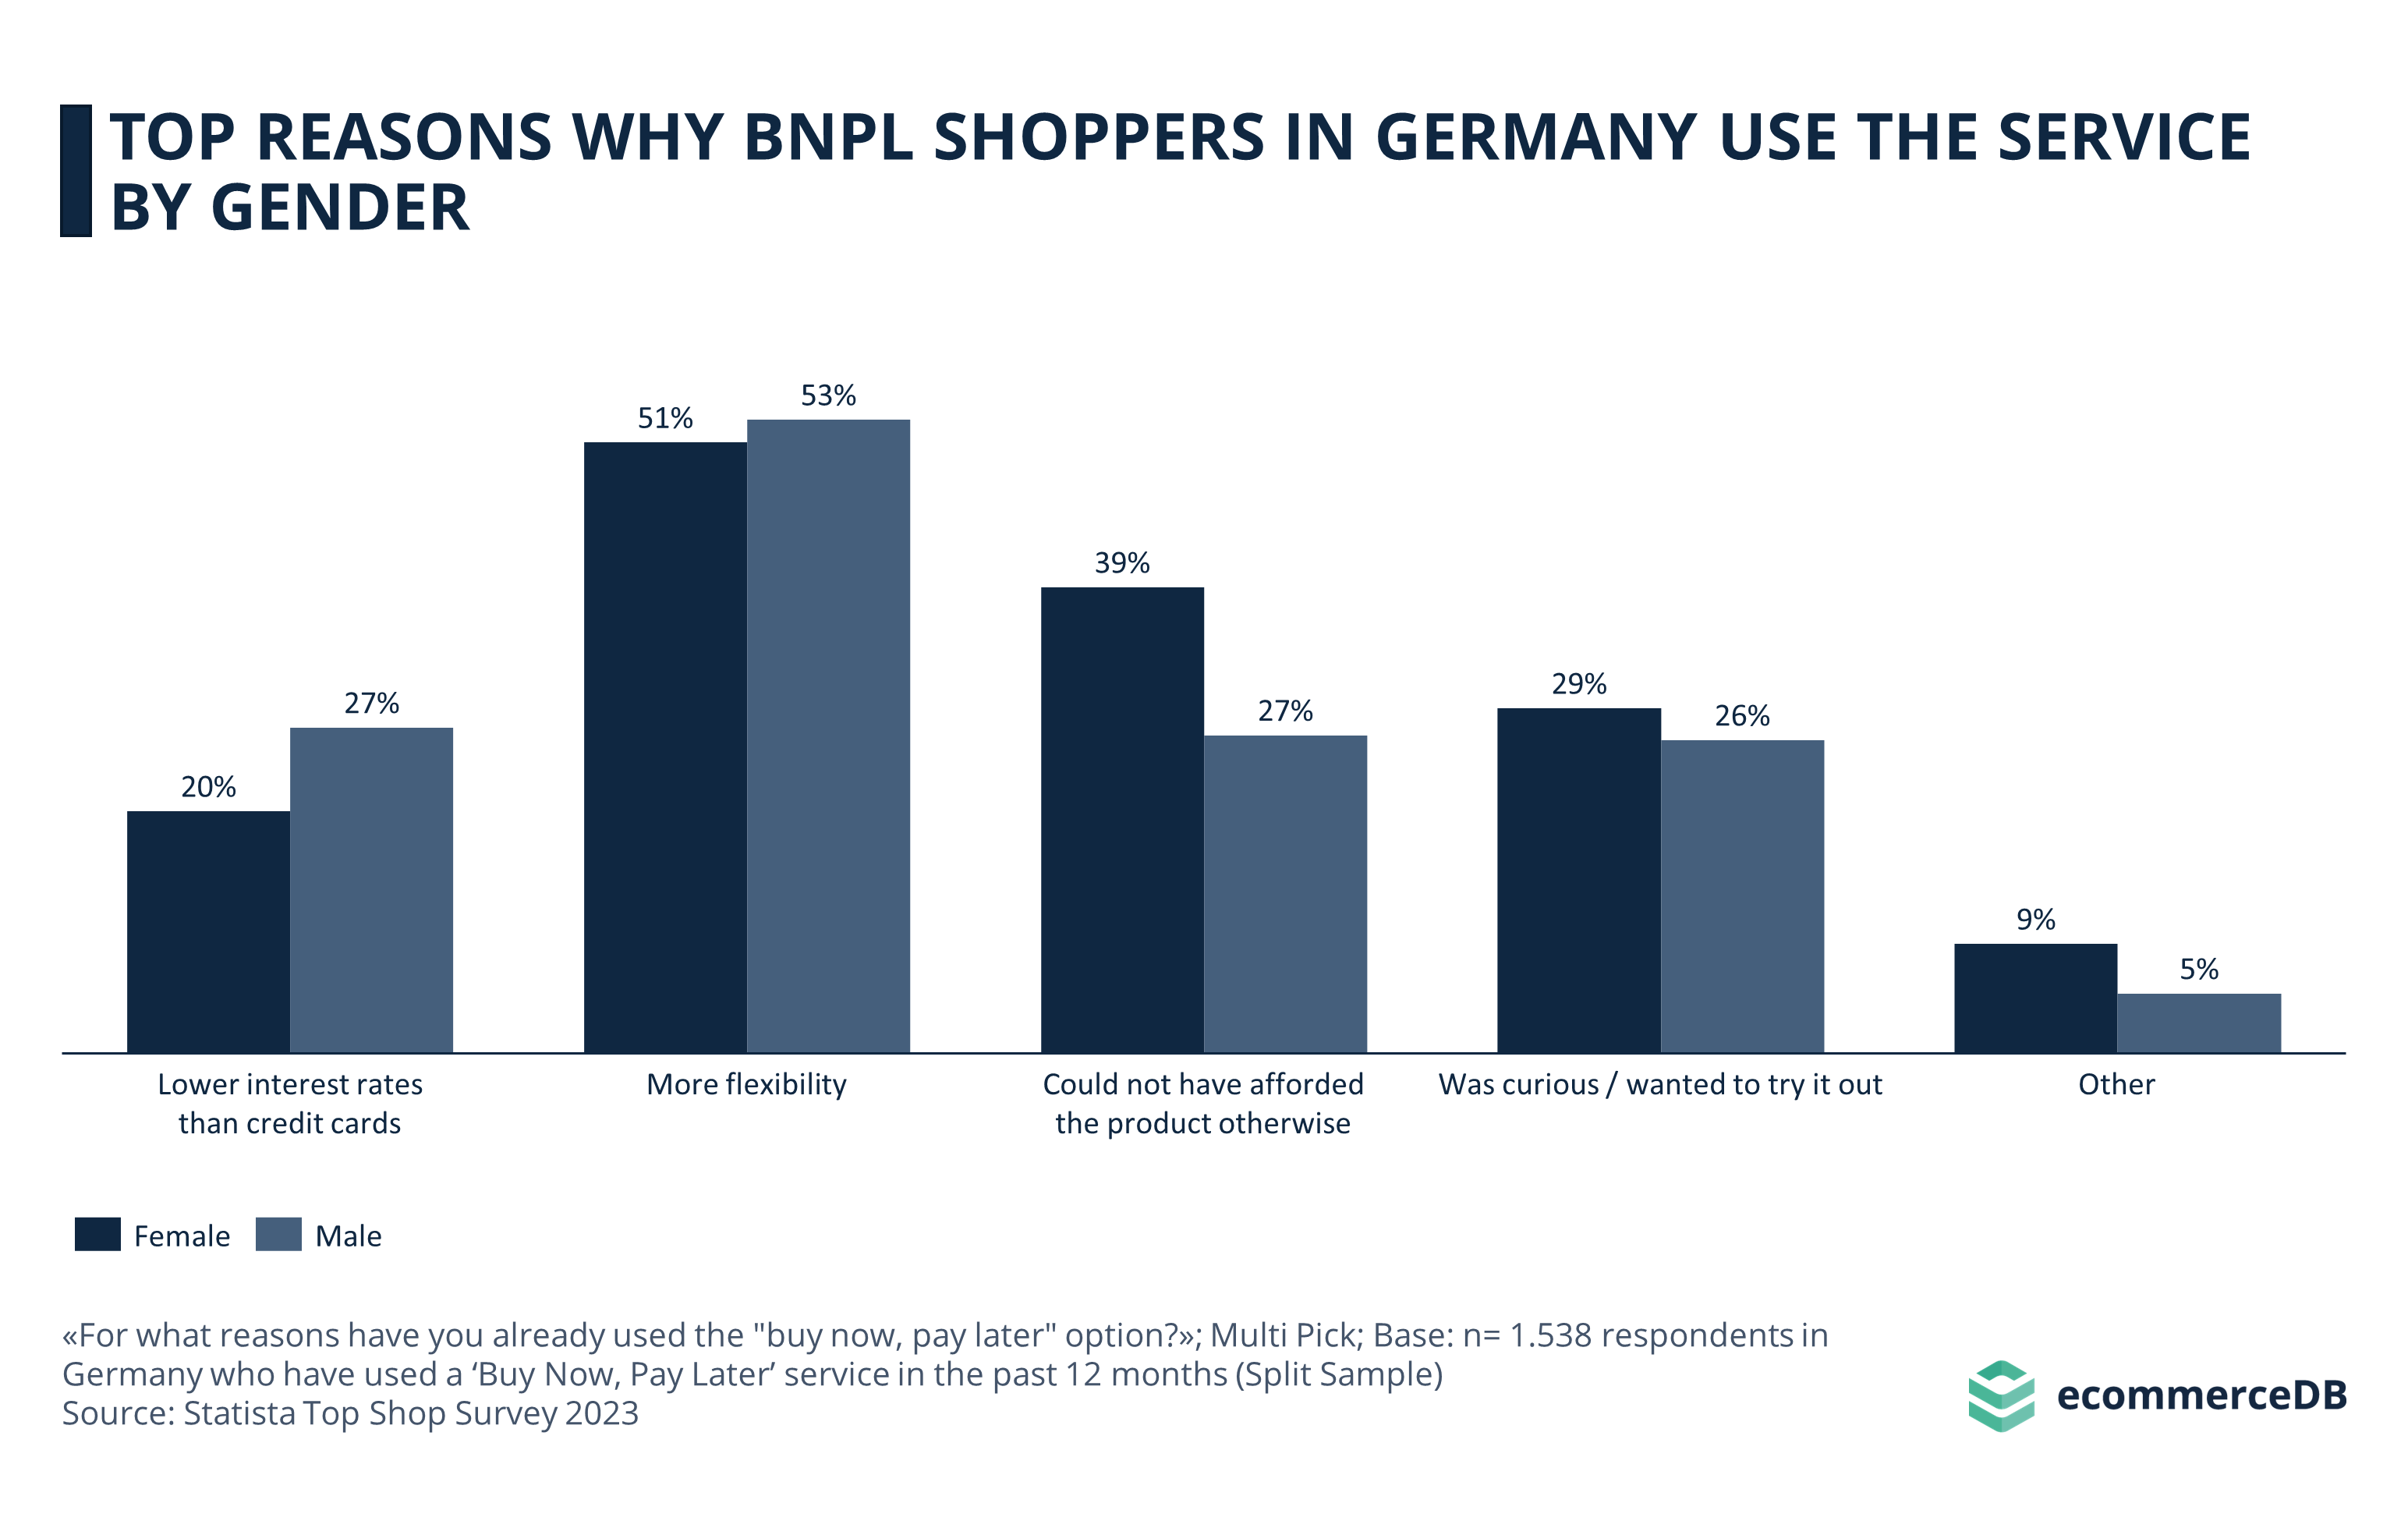 Top Reasons Why BNPL Shoppers in Germany Use the Service by Gender